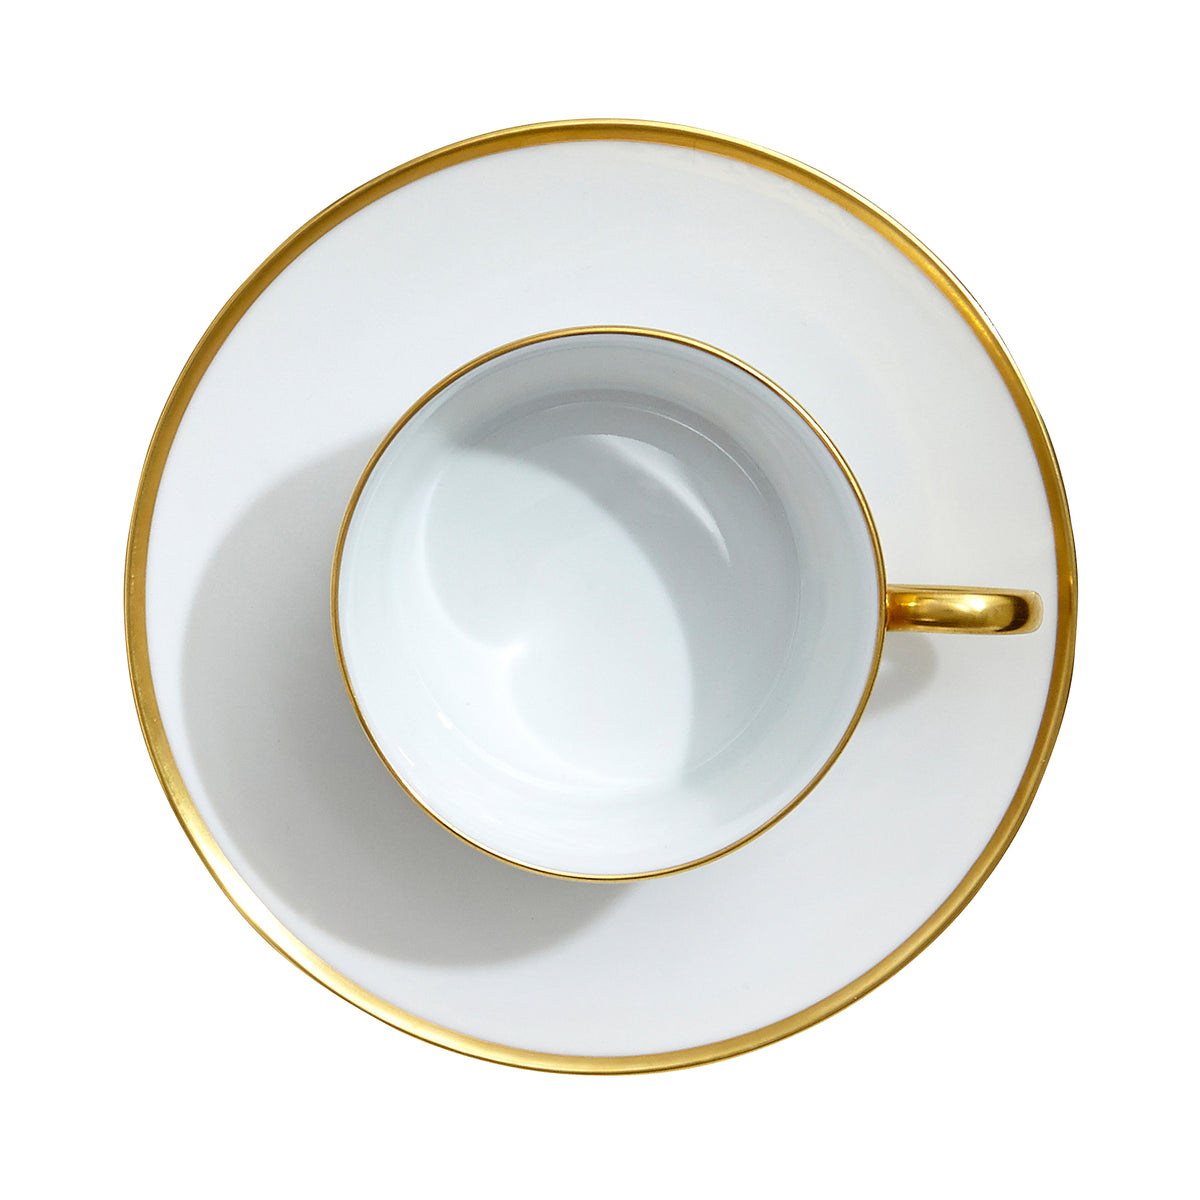 Odyssee Gold Porcelain Tea Cup and Saucer